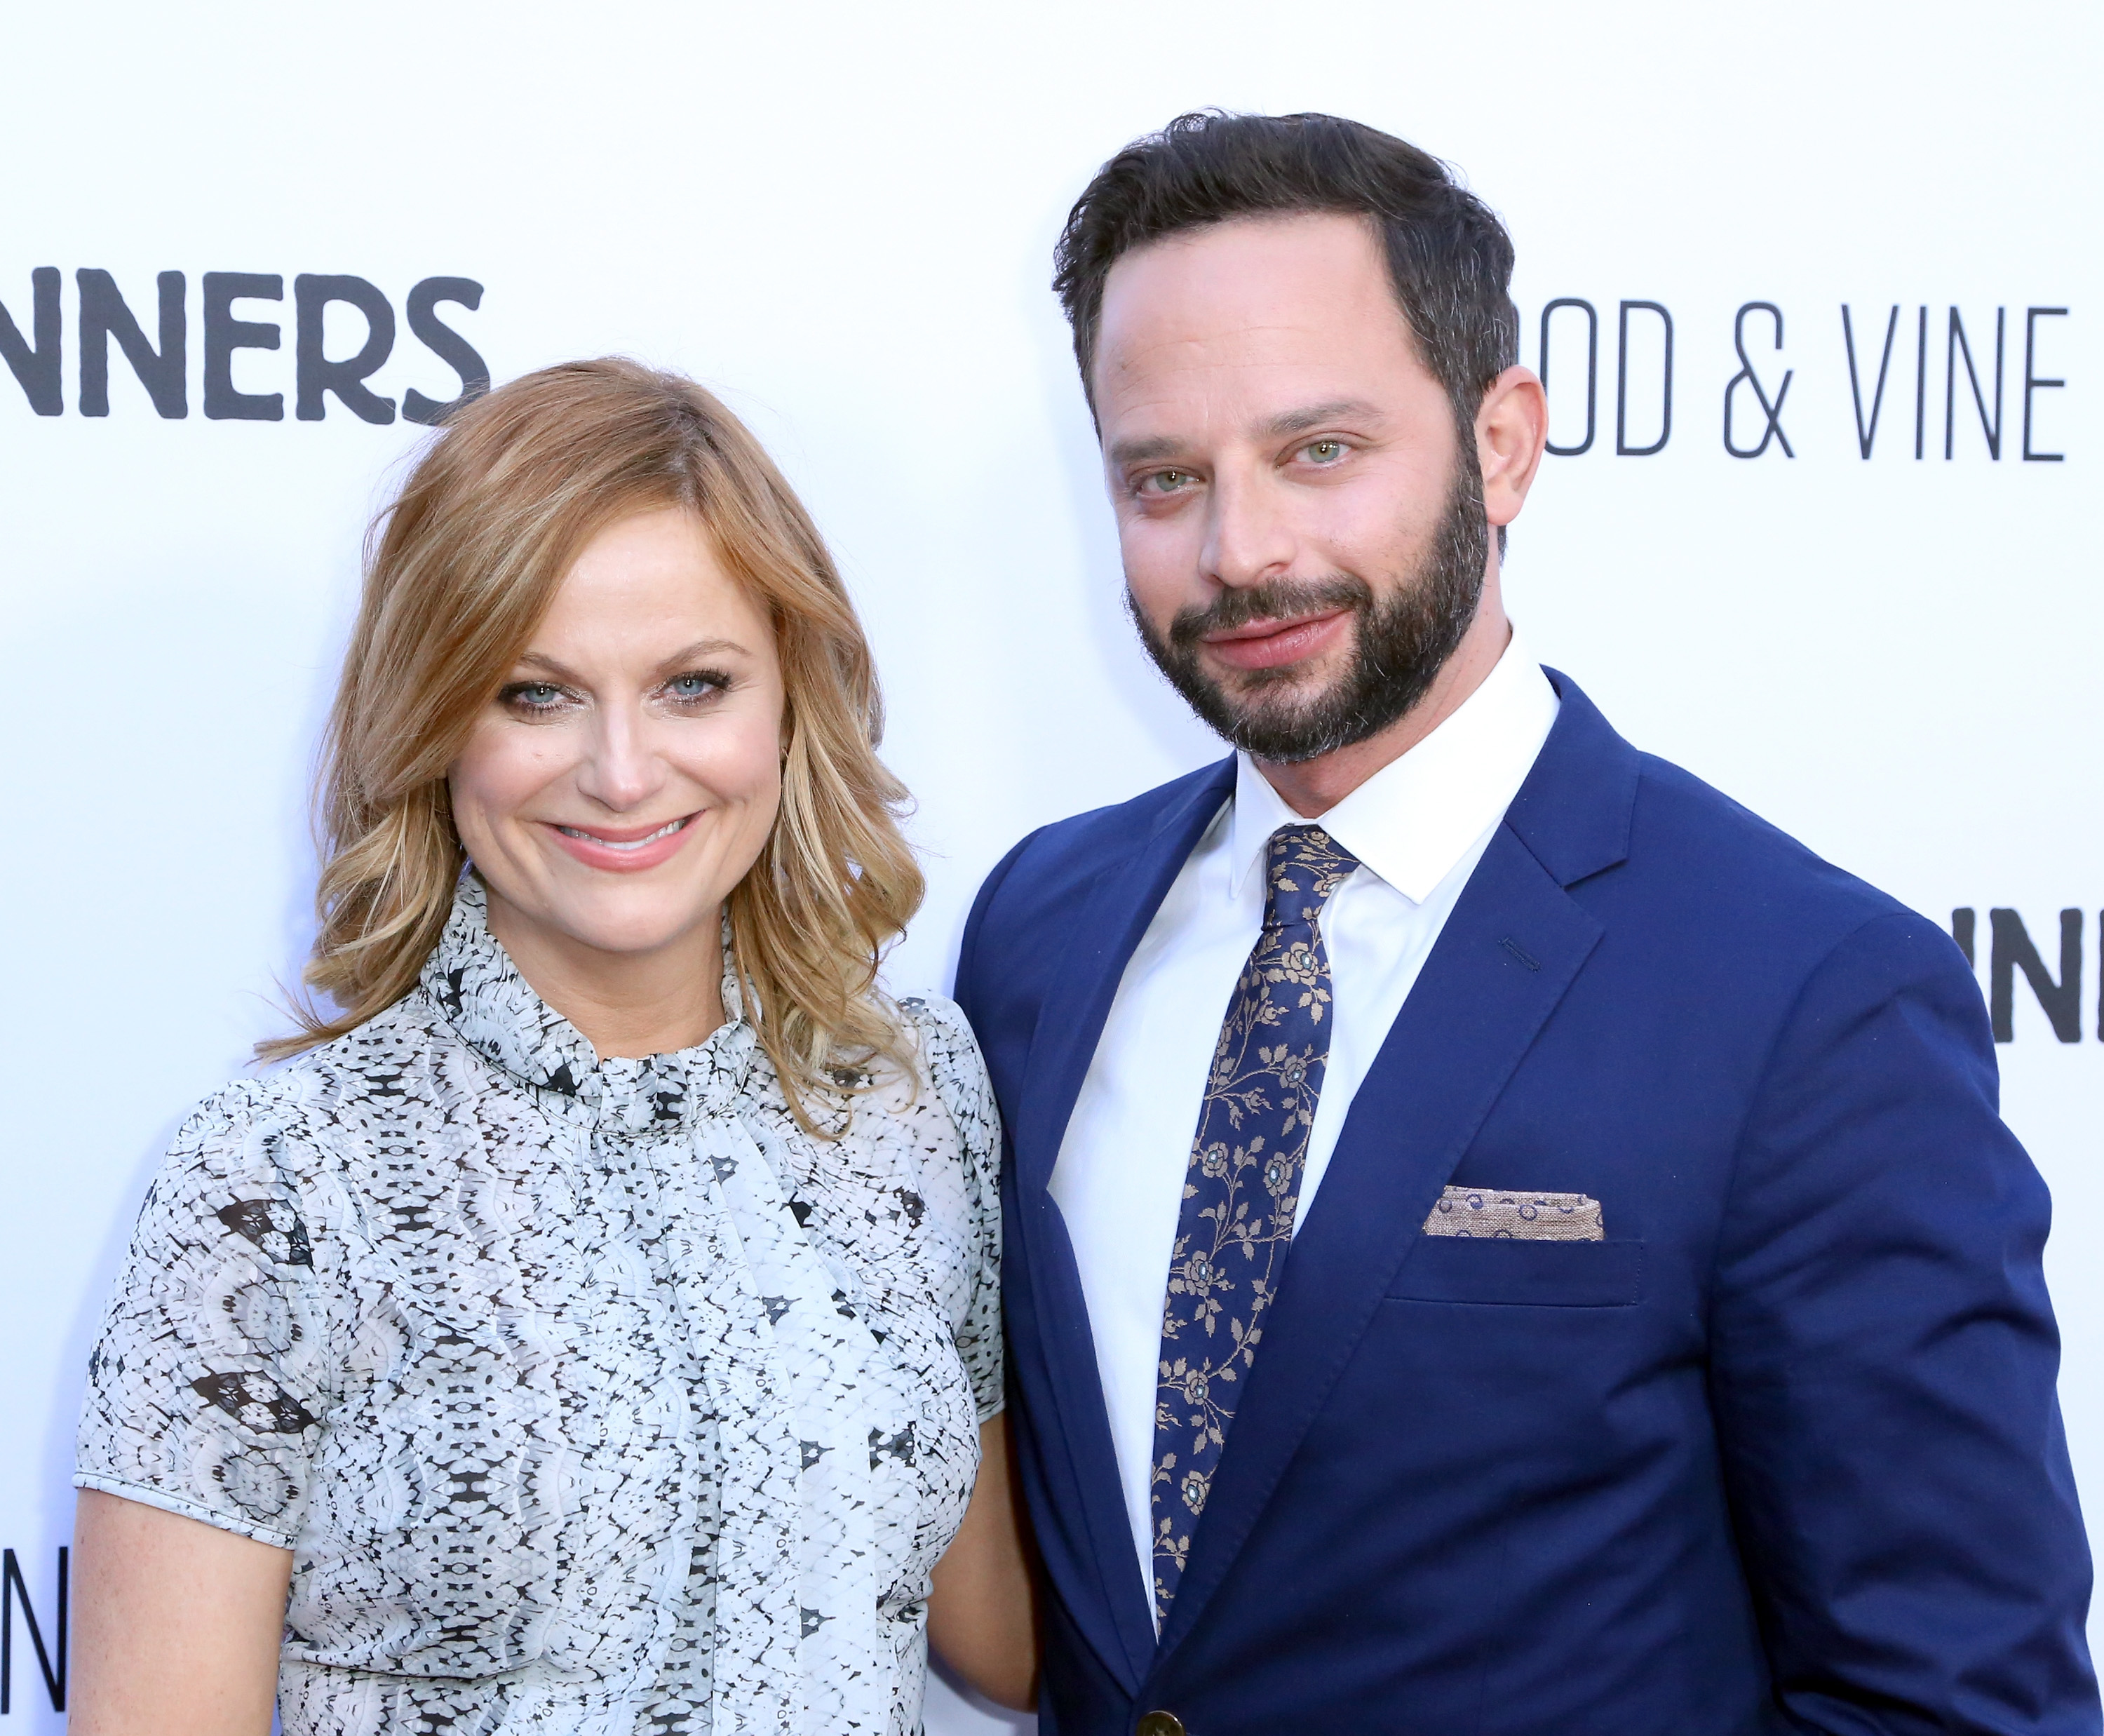 Amy Poehler and Nick Kroll at the premiere of RADiUS' "Adult Beginners" in Hollywood on April 15, 2015.